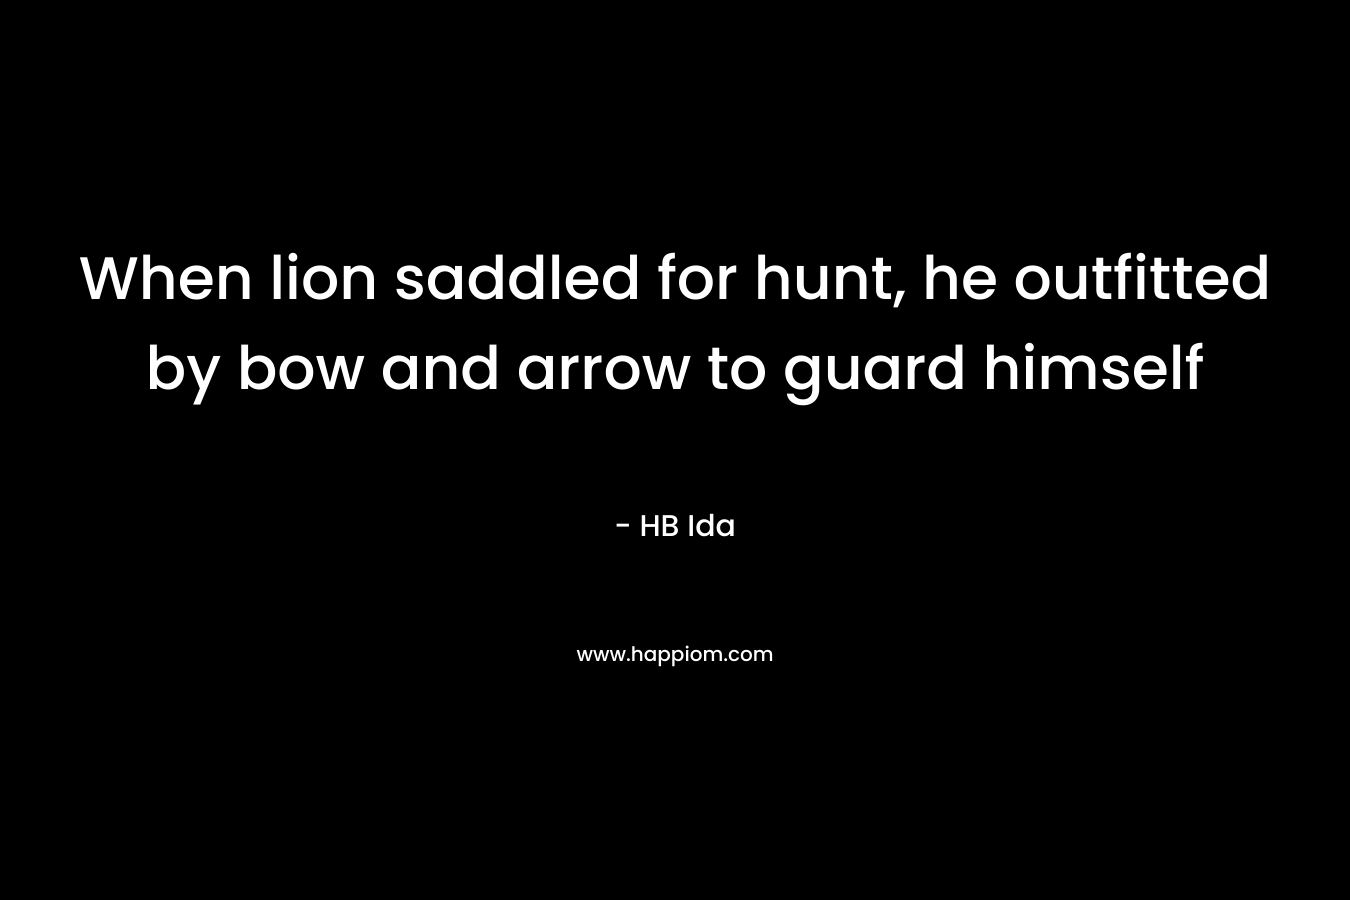 When lion saddled for hunt, he outfitted by bow and arrow to guard himself